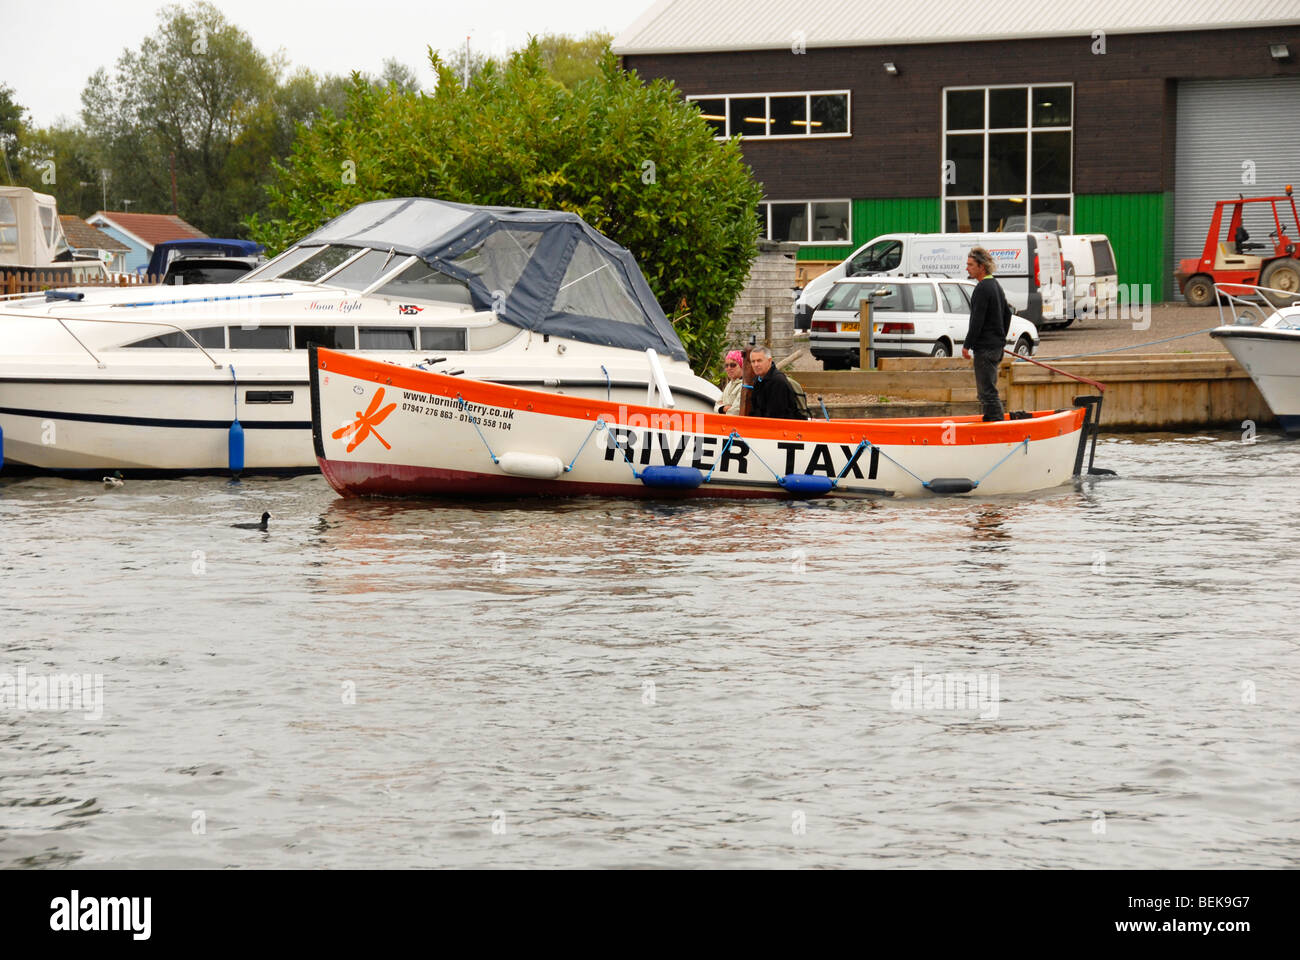 Small open launch acting as river taxi, Horning, Norfolk, England Stock Photo